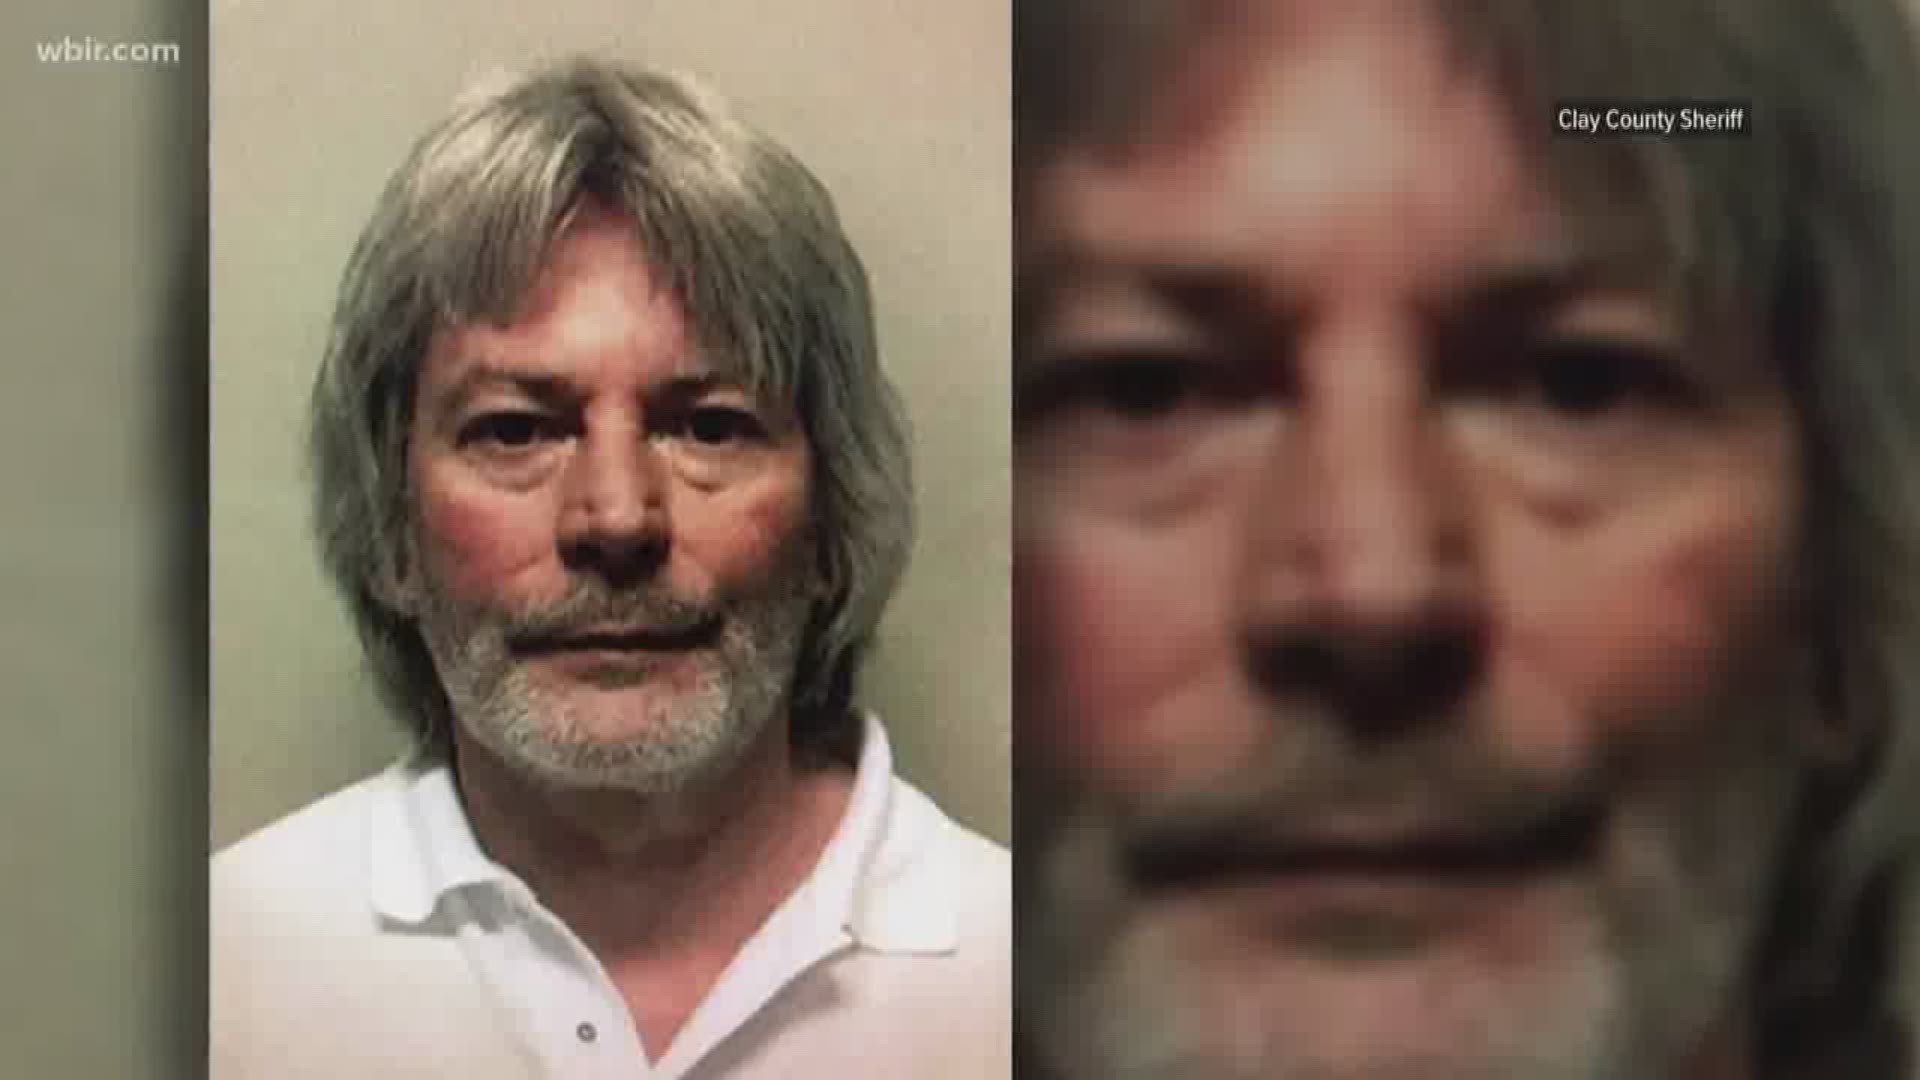 A man convicted of rape and murder released from jail.  Now -- he's on the run for kidnapping and assault. Plus, Gov. Bill Lee says he's prepared to put his foot down if the TN House speaker doesn't resign following a no confidence vote. These headlines and more aired May 20 on the 10News Nightbeat at 11.